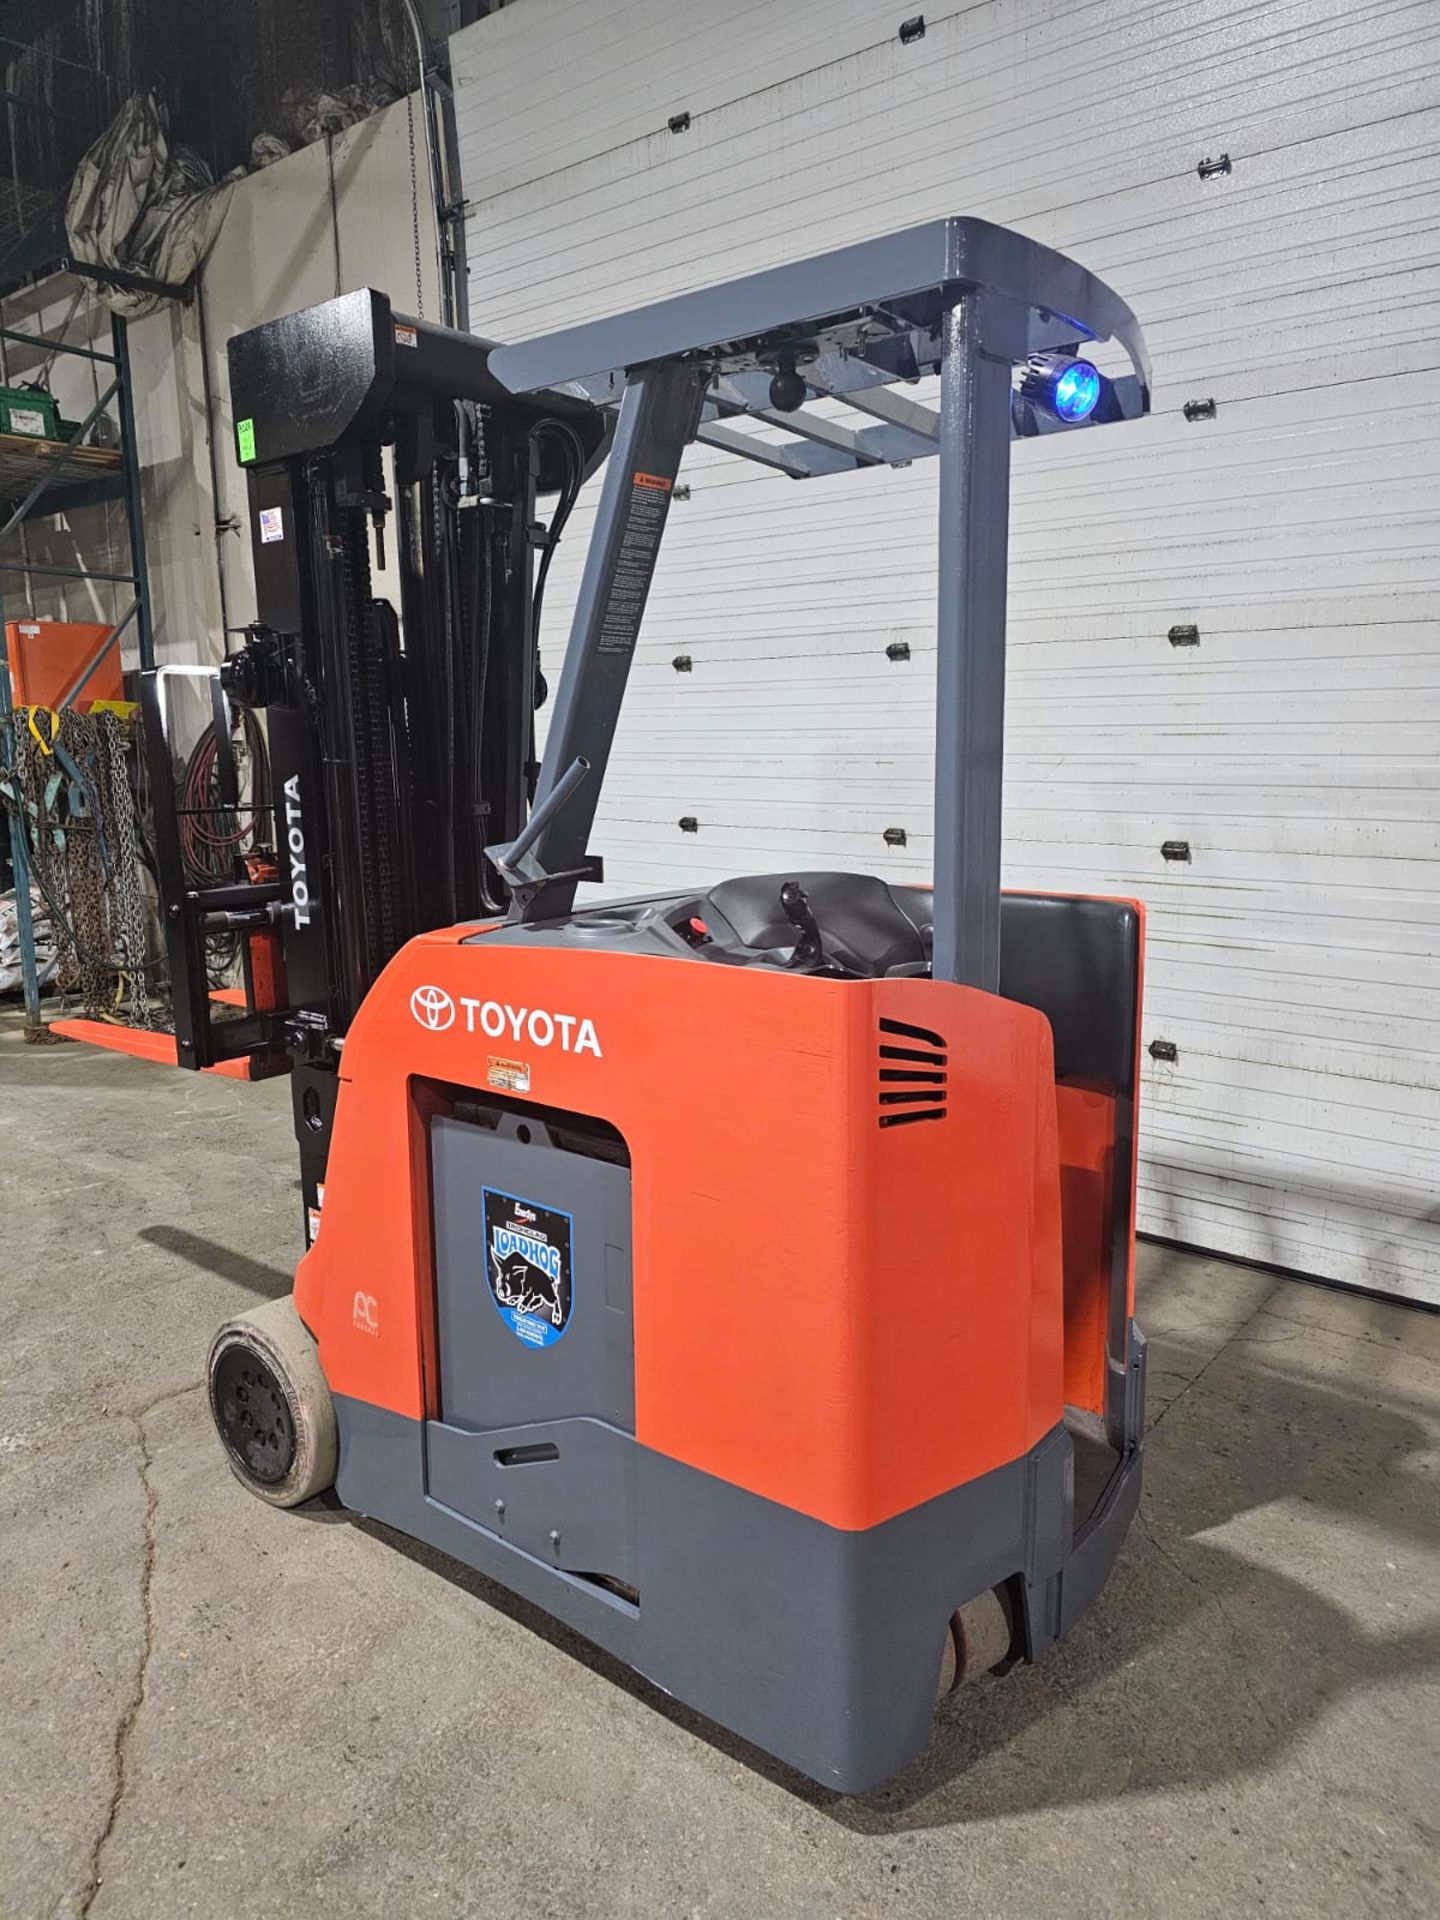 2017 Toyota 4,000lbs Capacity Electric Forklift with 4-STAGE Mast, 276" load height sideshift, 36V - Image 2 of 7